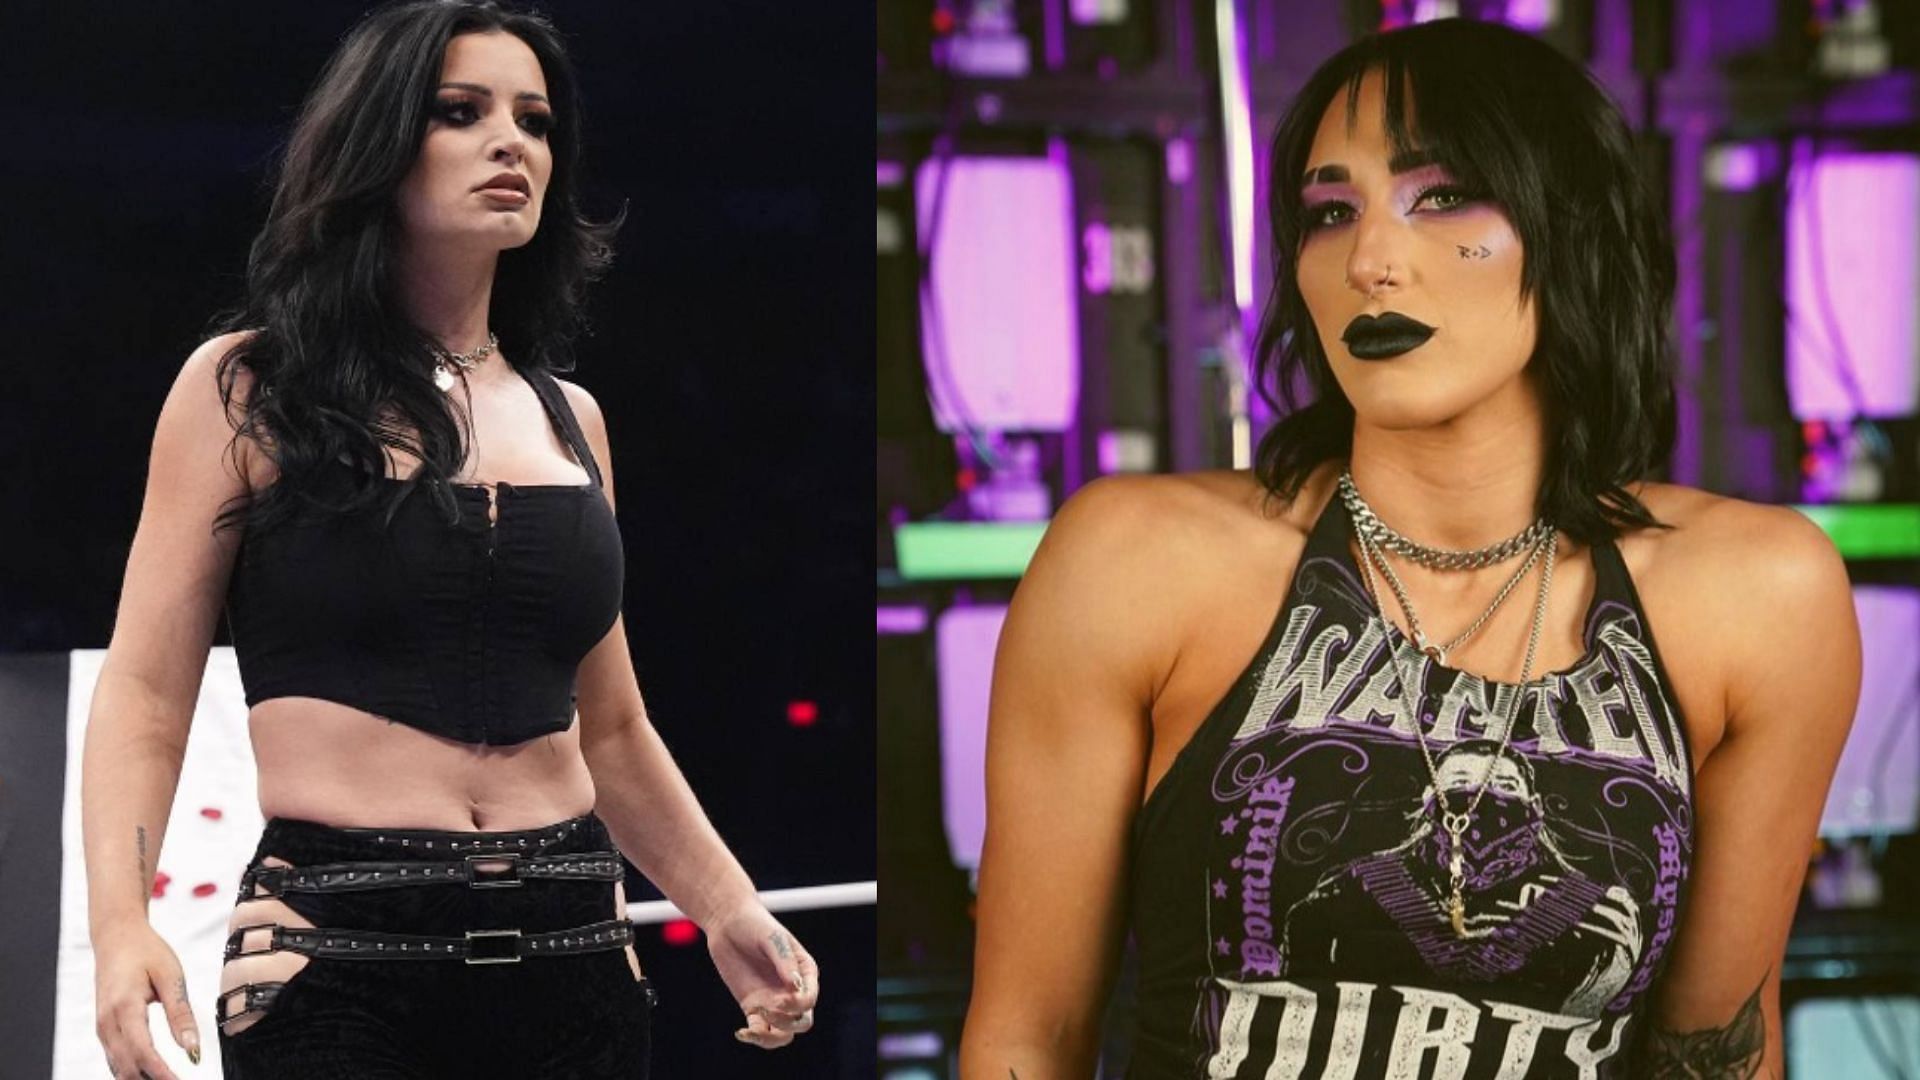 Saraya is currently signed with All Elite Wrestling [Image Credits: AEW